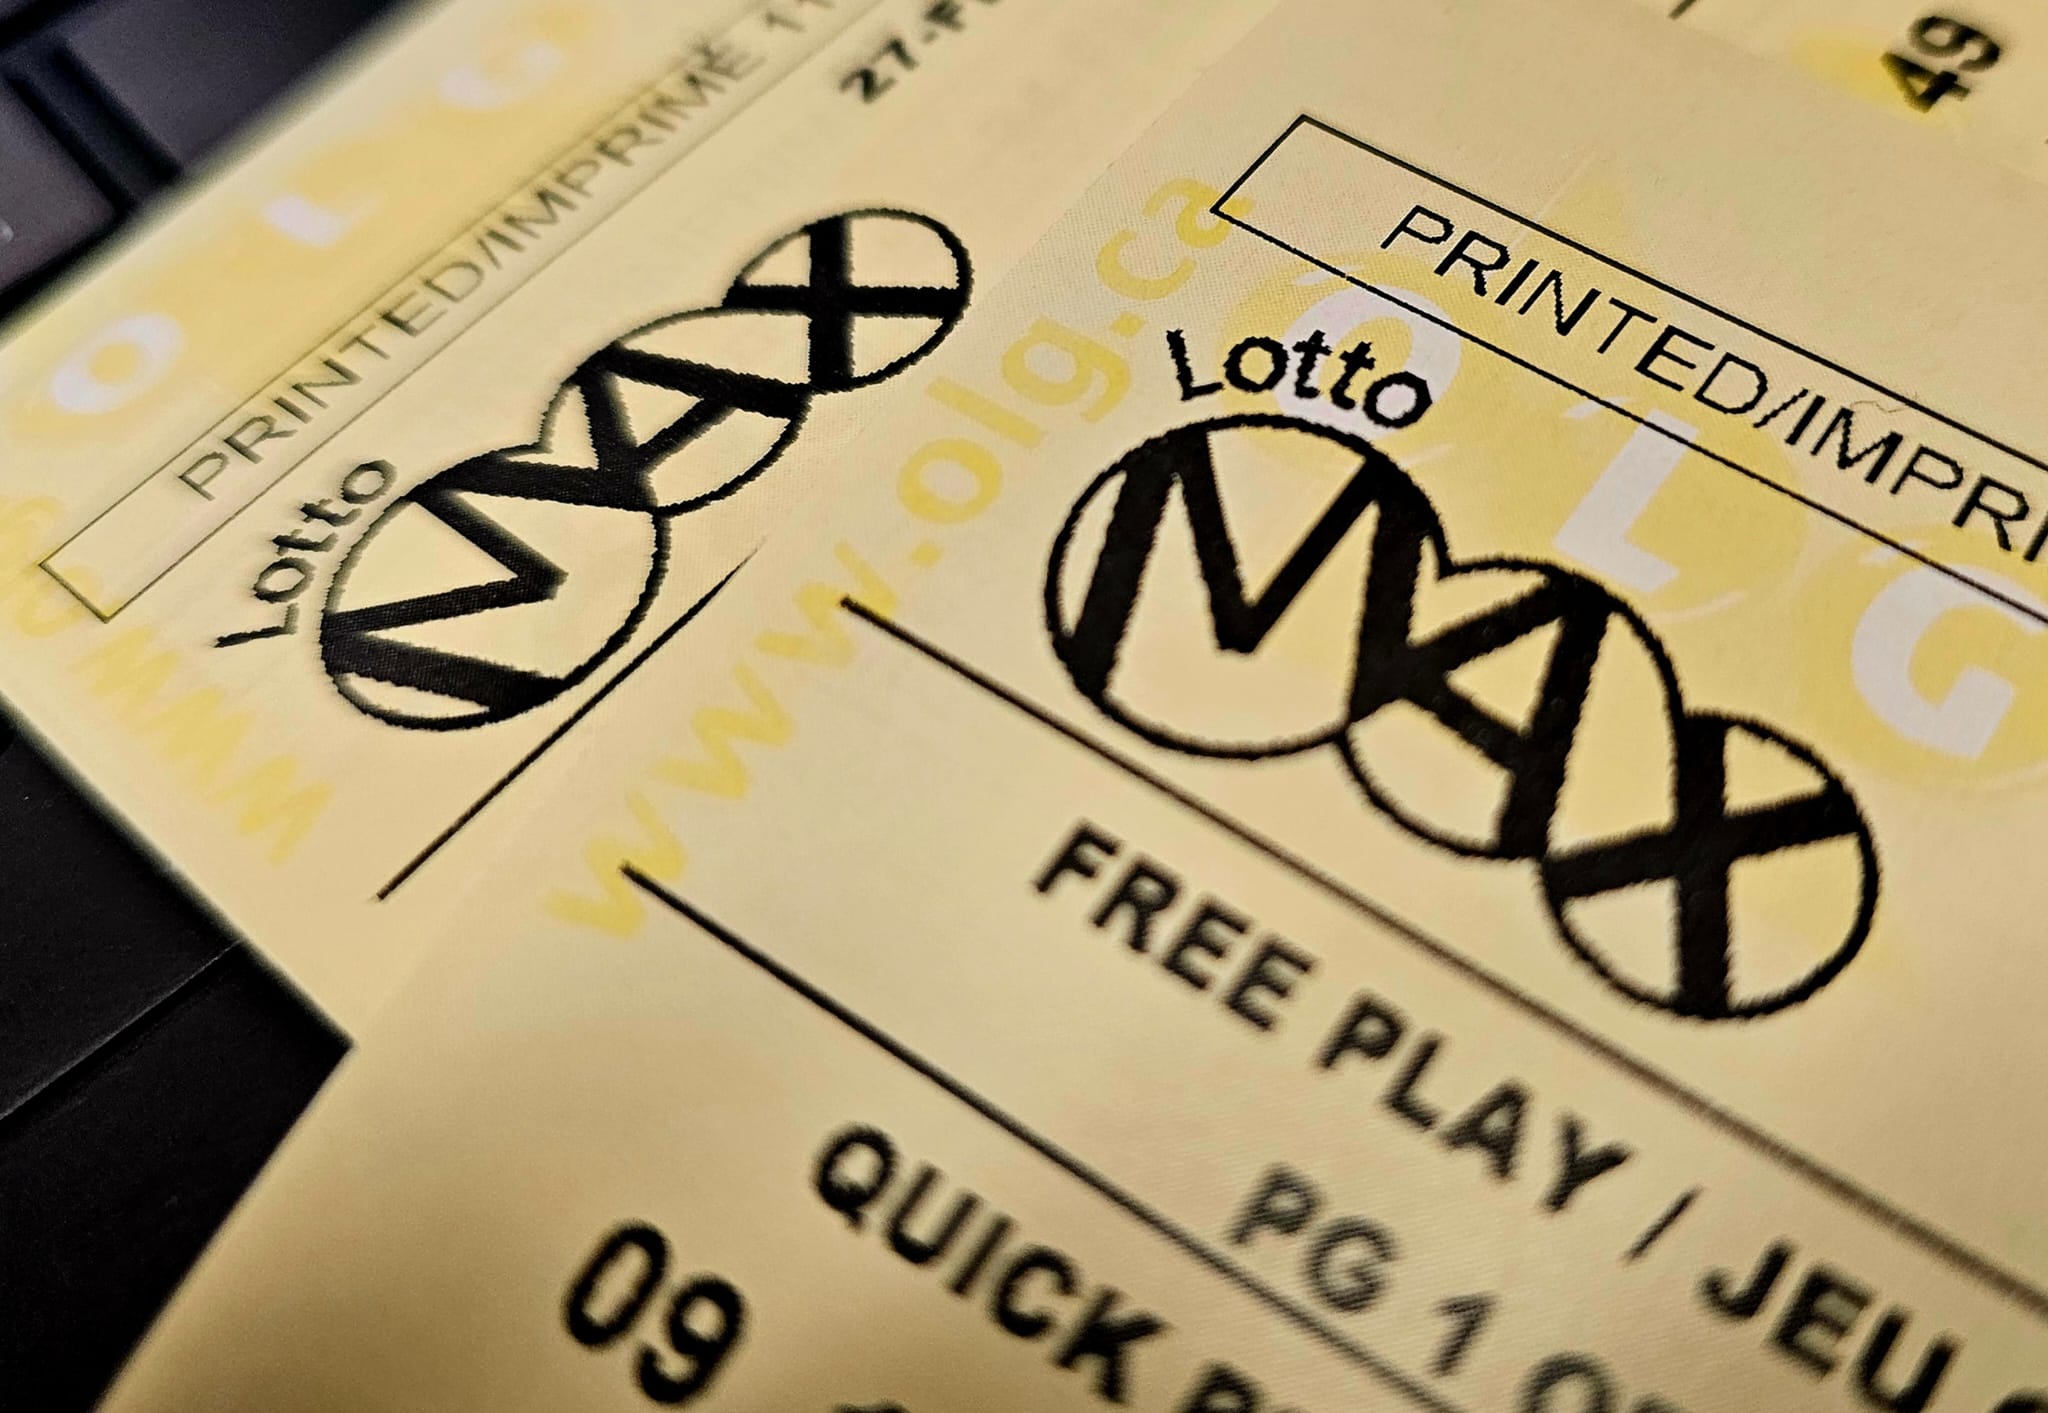 $30 million jackpot and all the winning lottery numbers for the evening of March 26